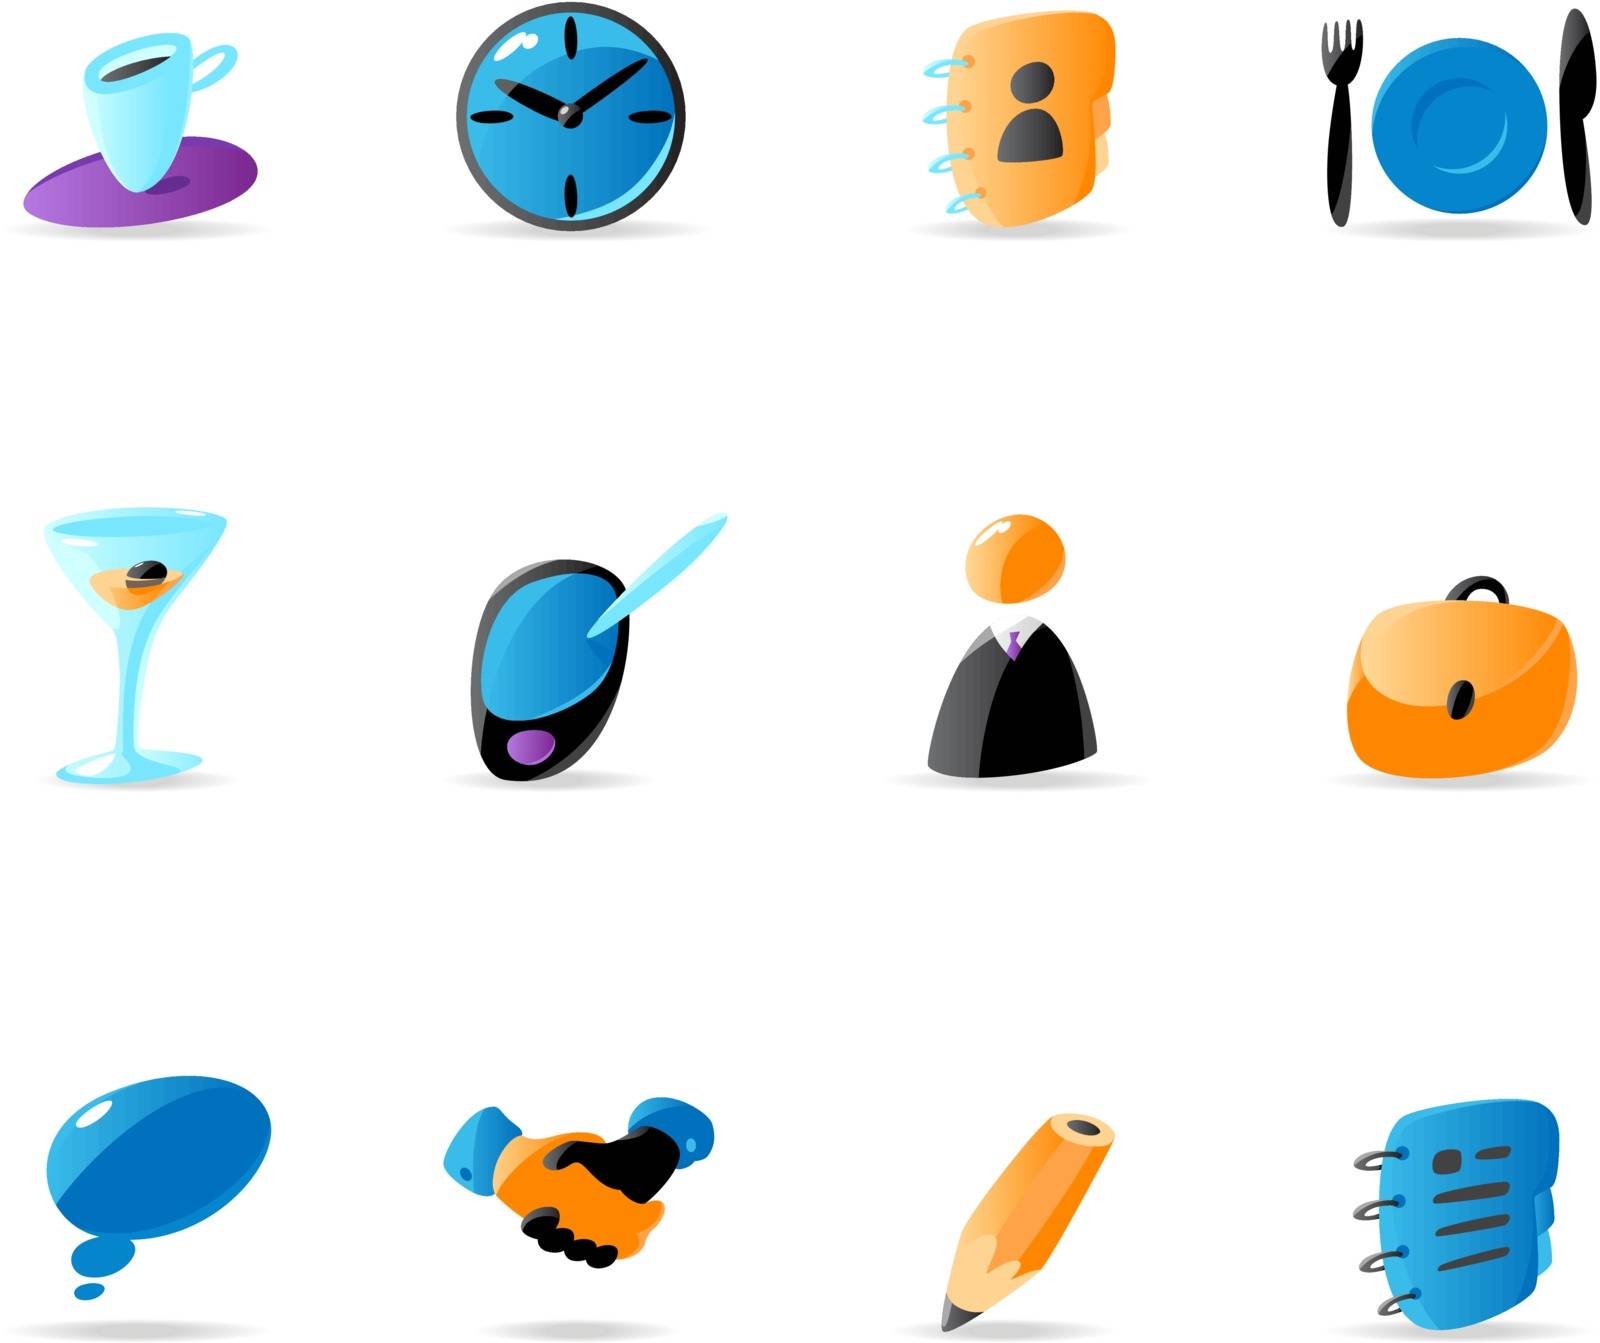 Bright business contacts and meeting icons by ildogesto